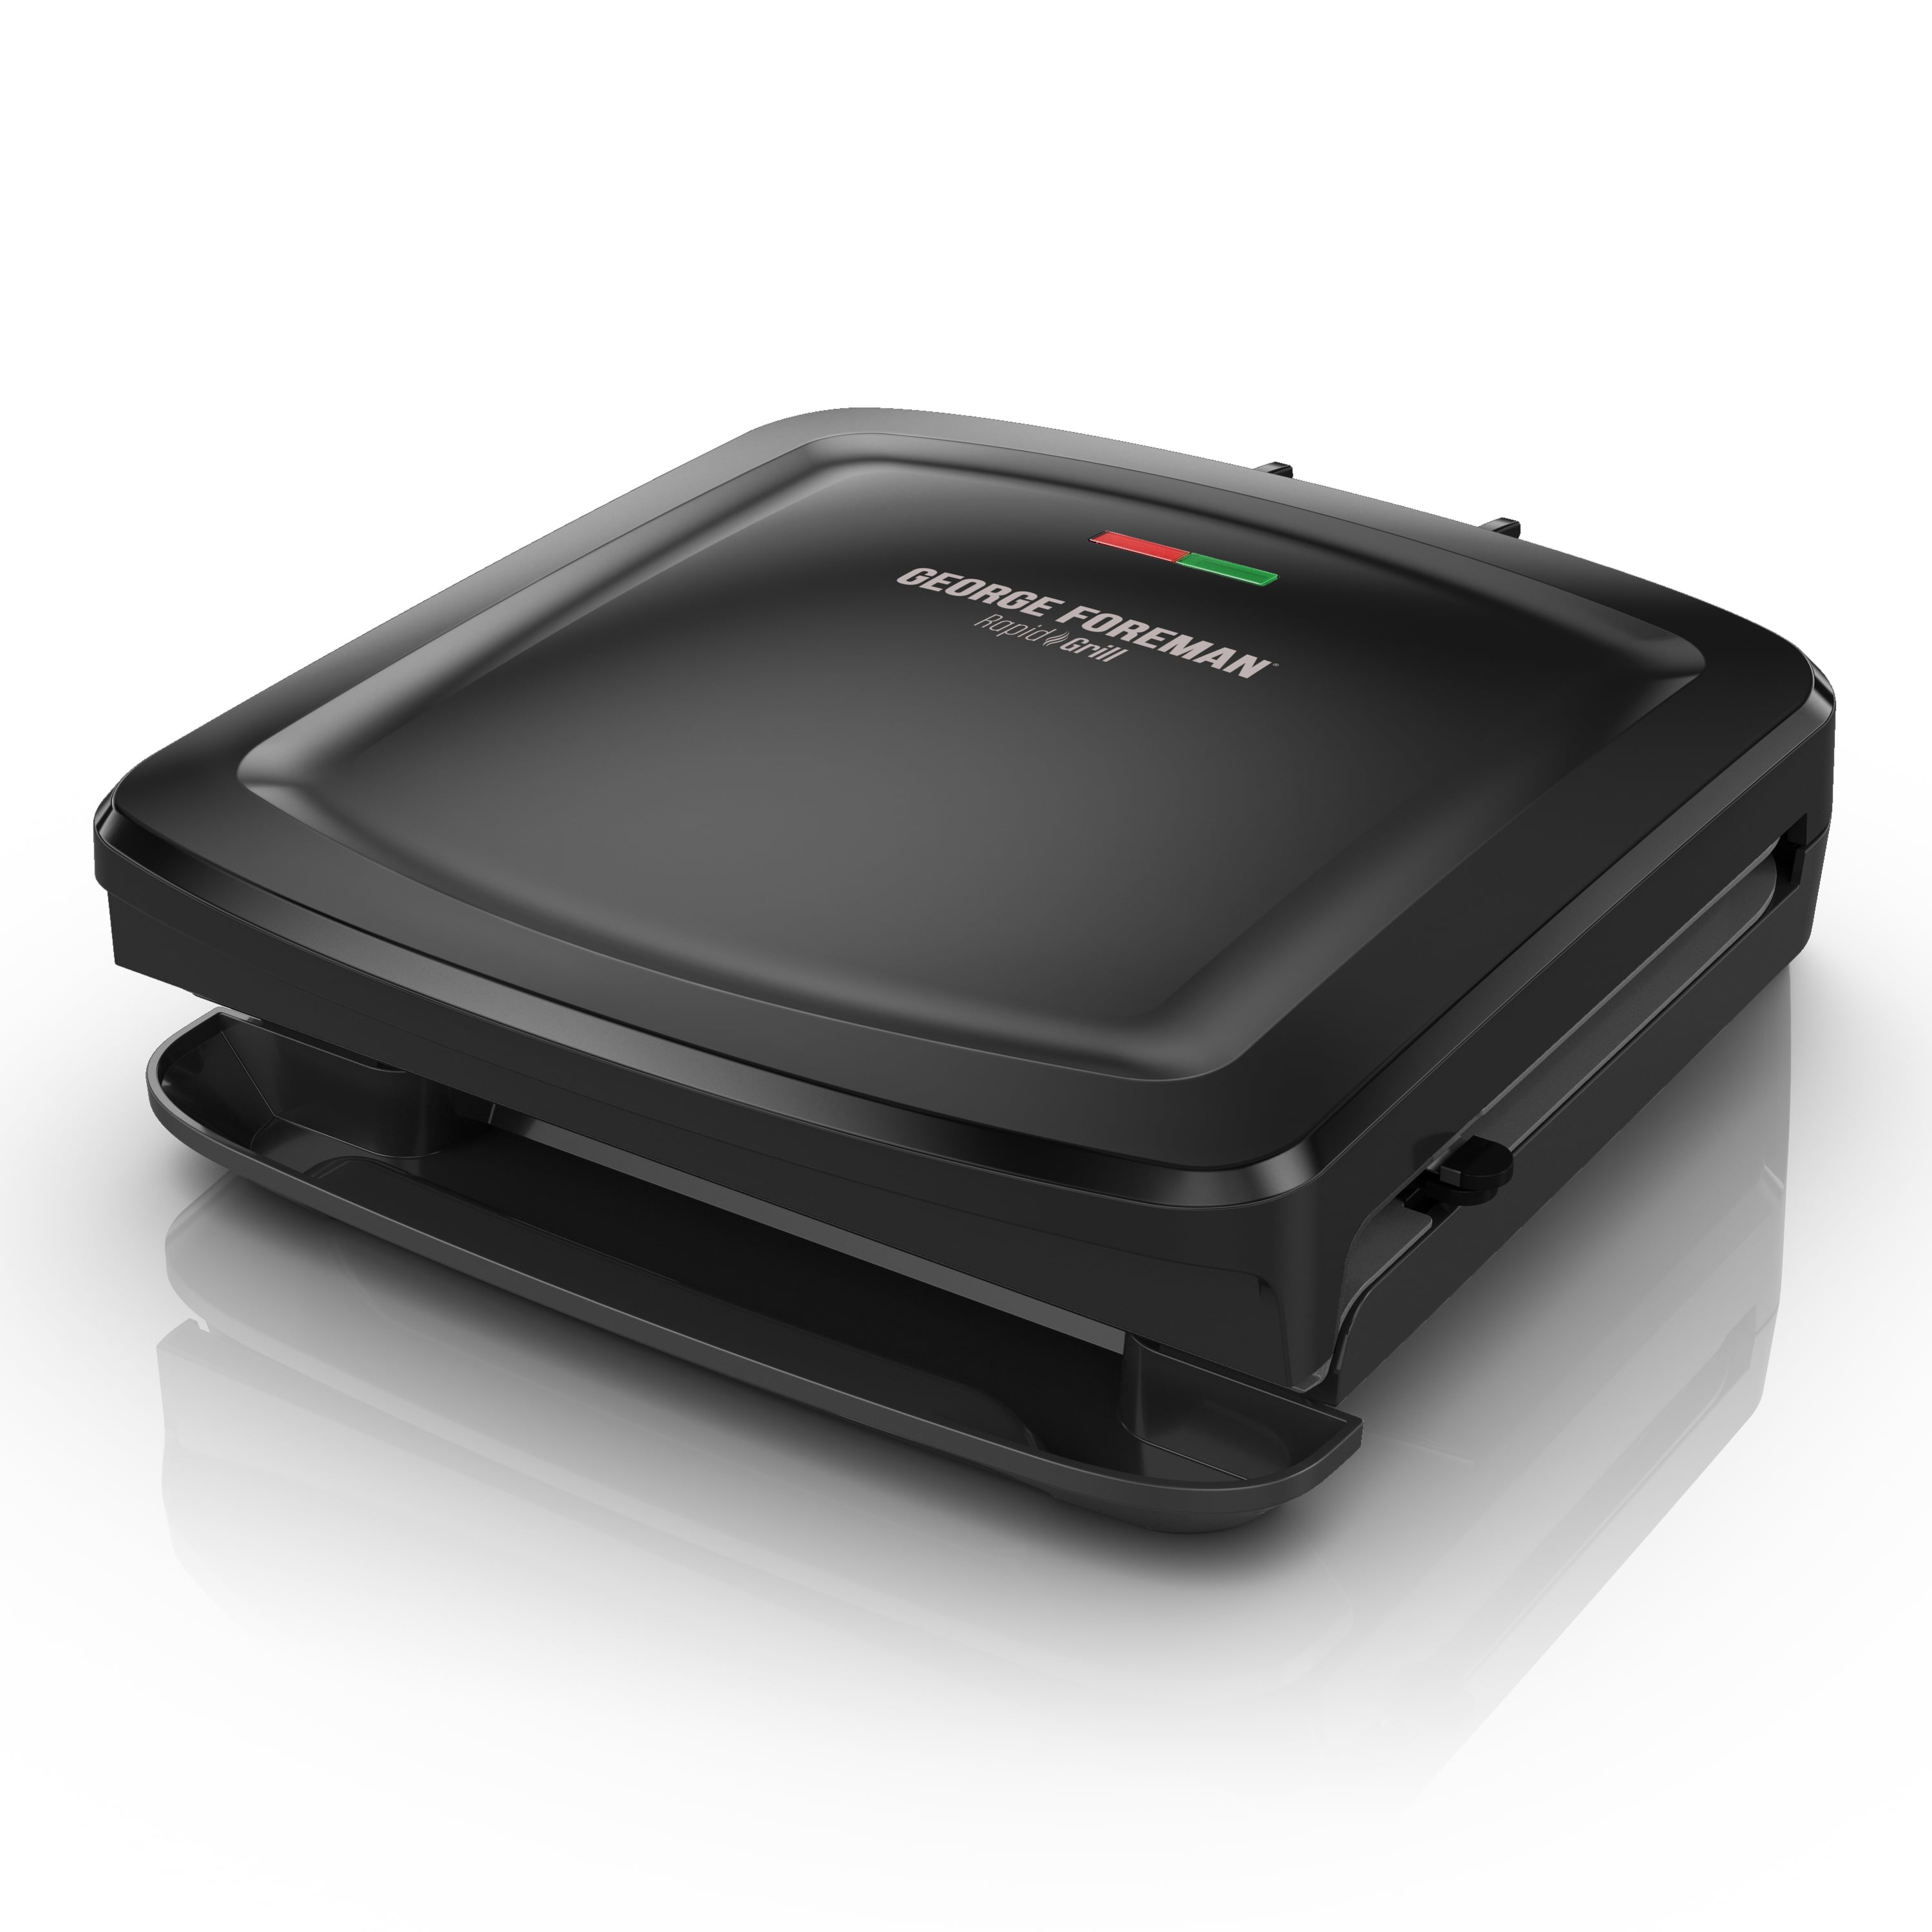 The George Foreman 4-Serving Removable Plate Grill 